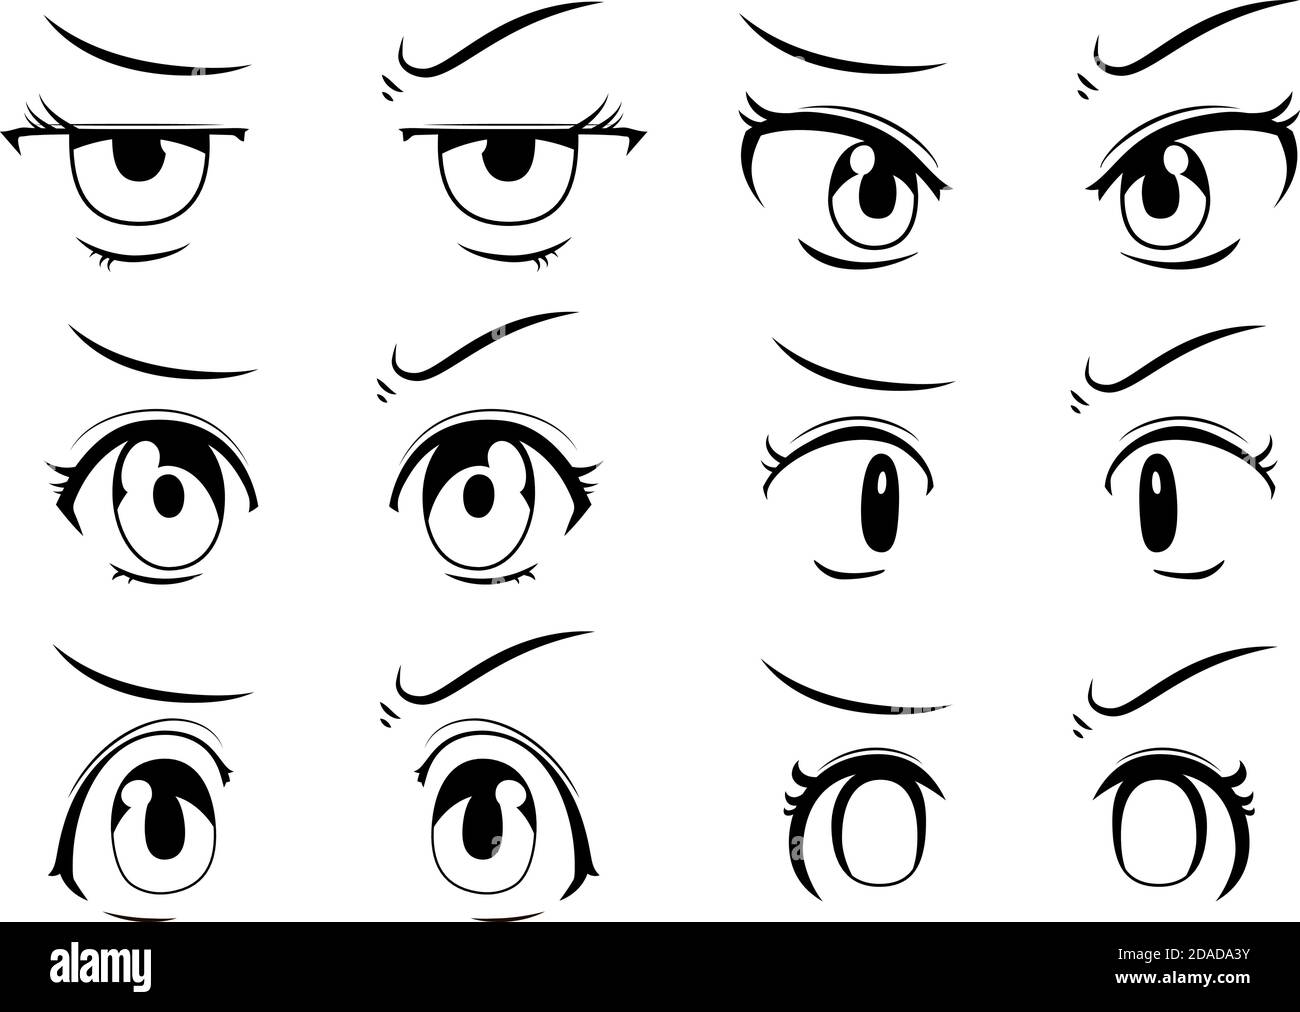 This is a illustration of Monochrome Cute anime-style eyes with a ...